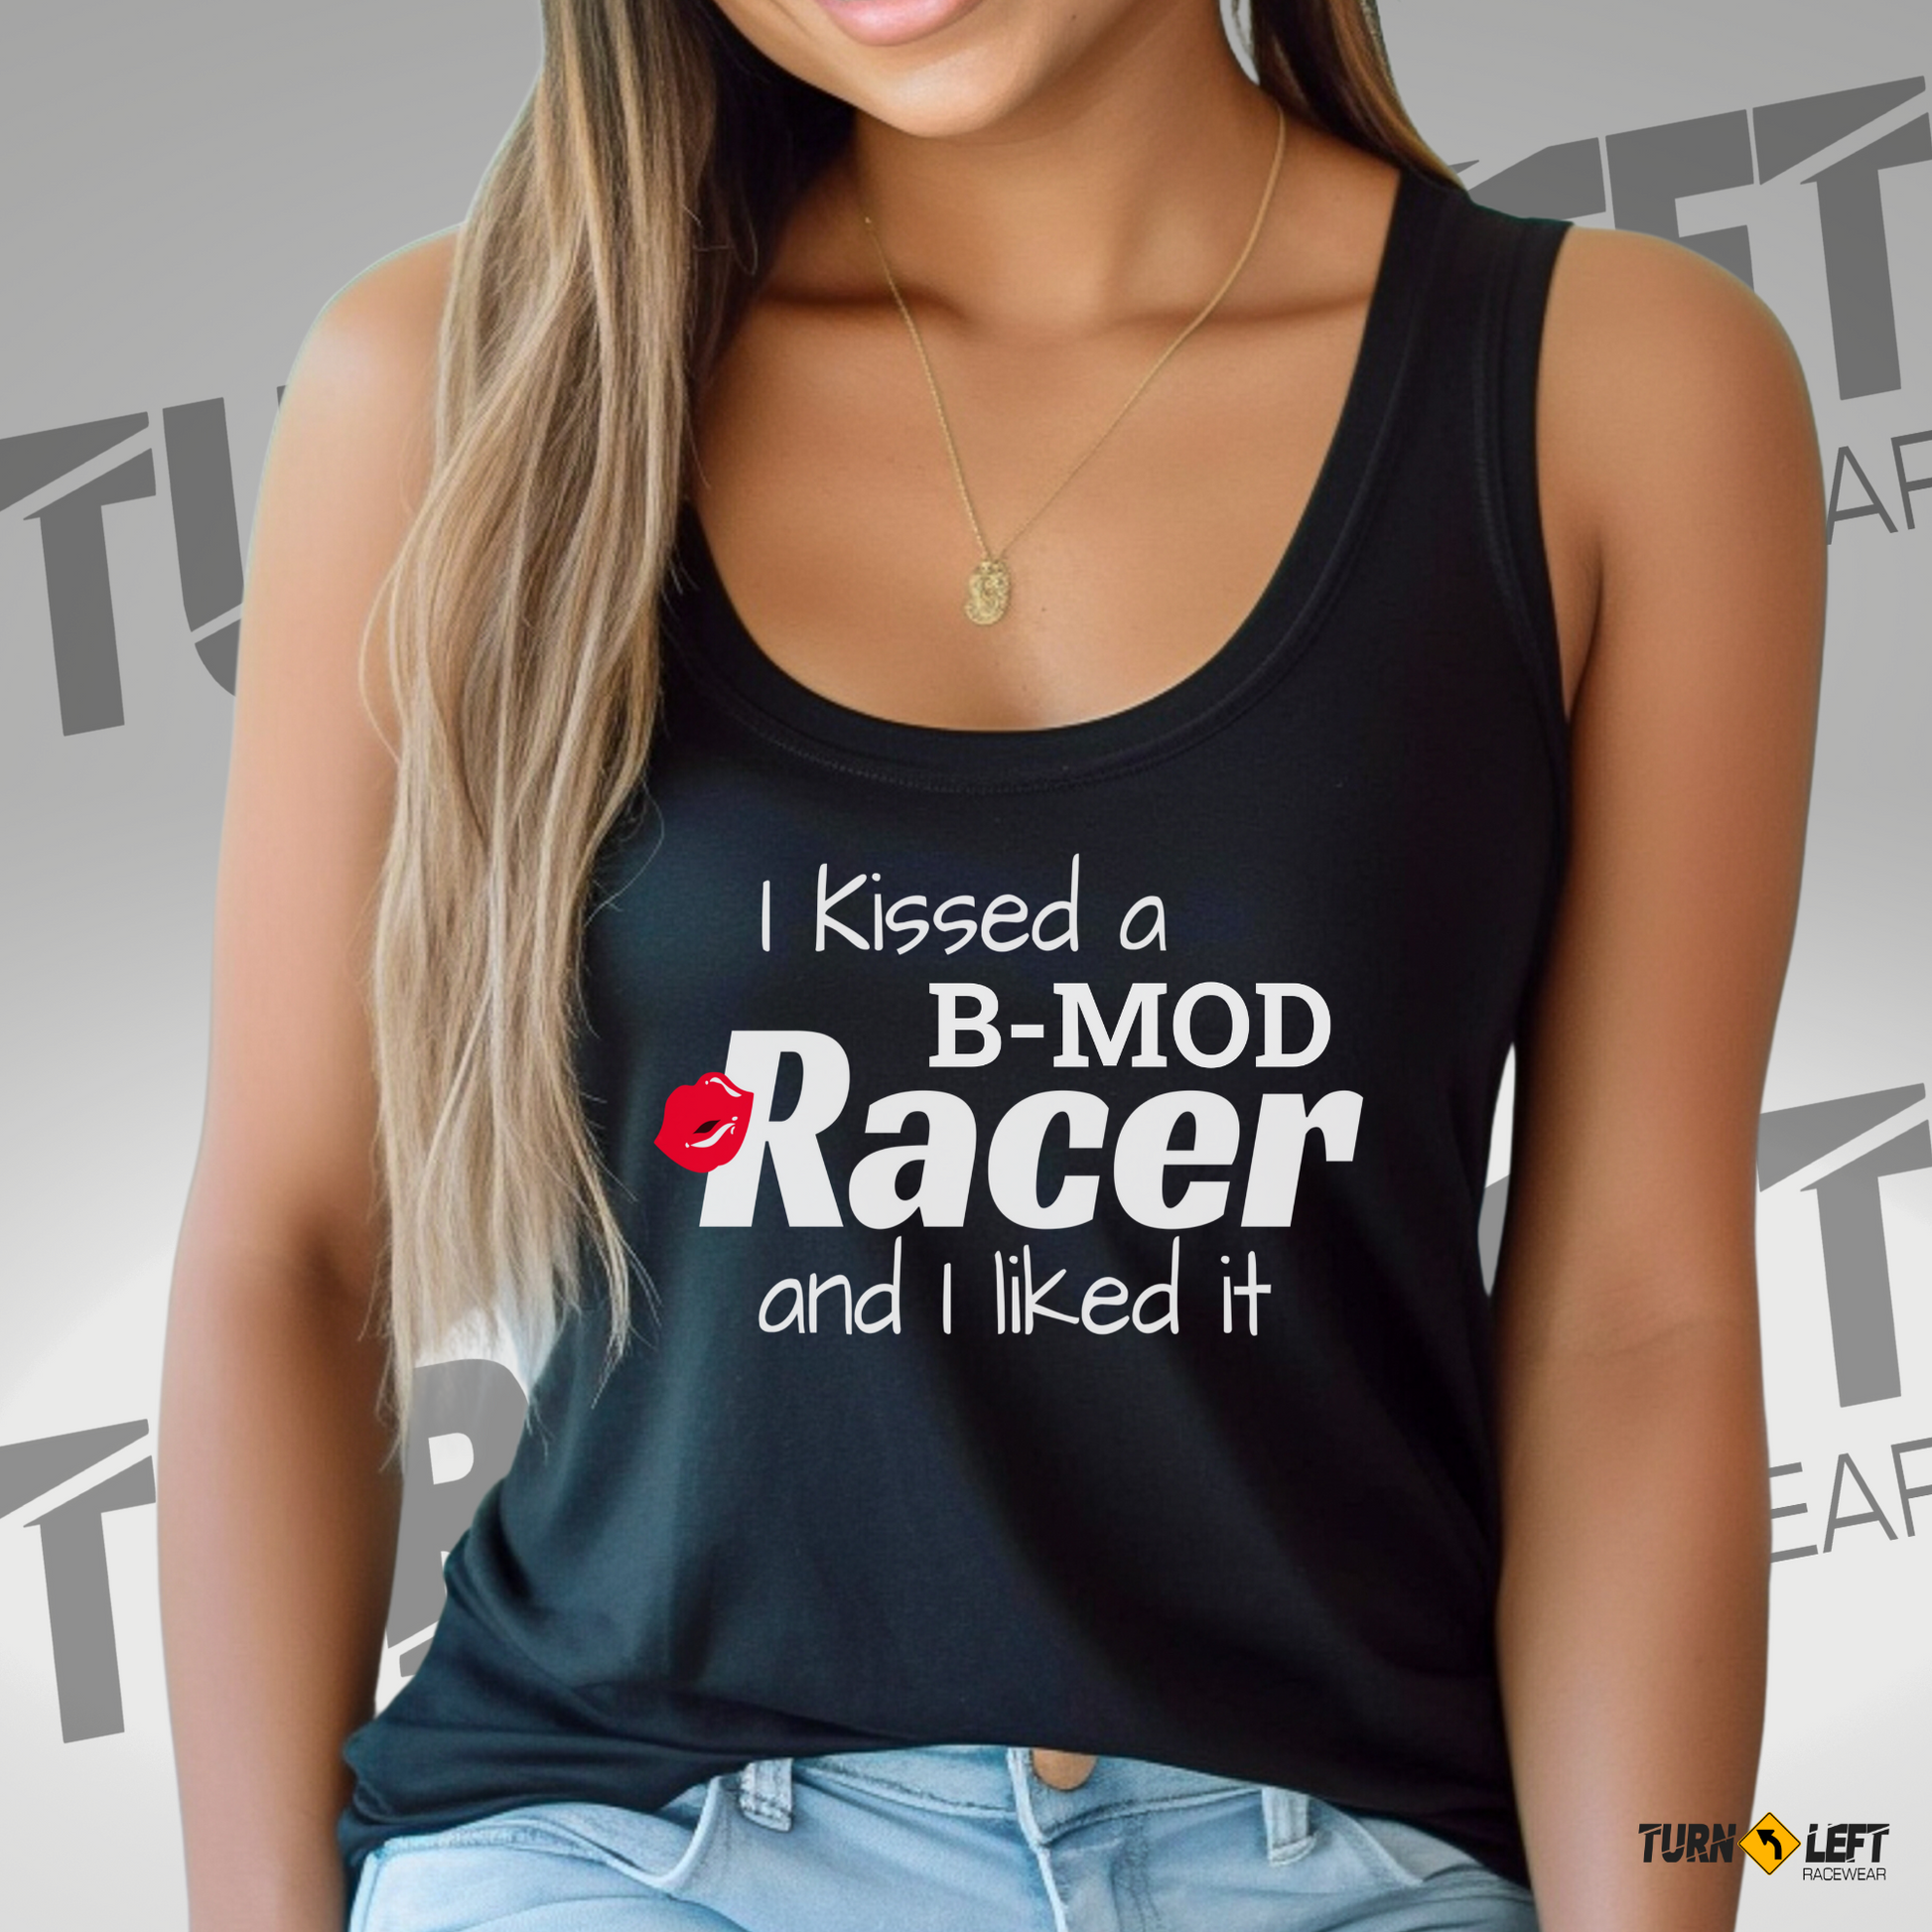 I Kissed A B-Mod Racer And I Liked It Tank Top. Womens dirt track racing shirts